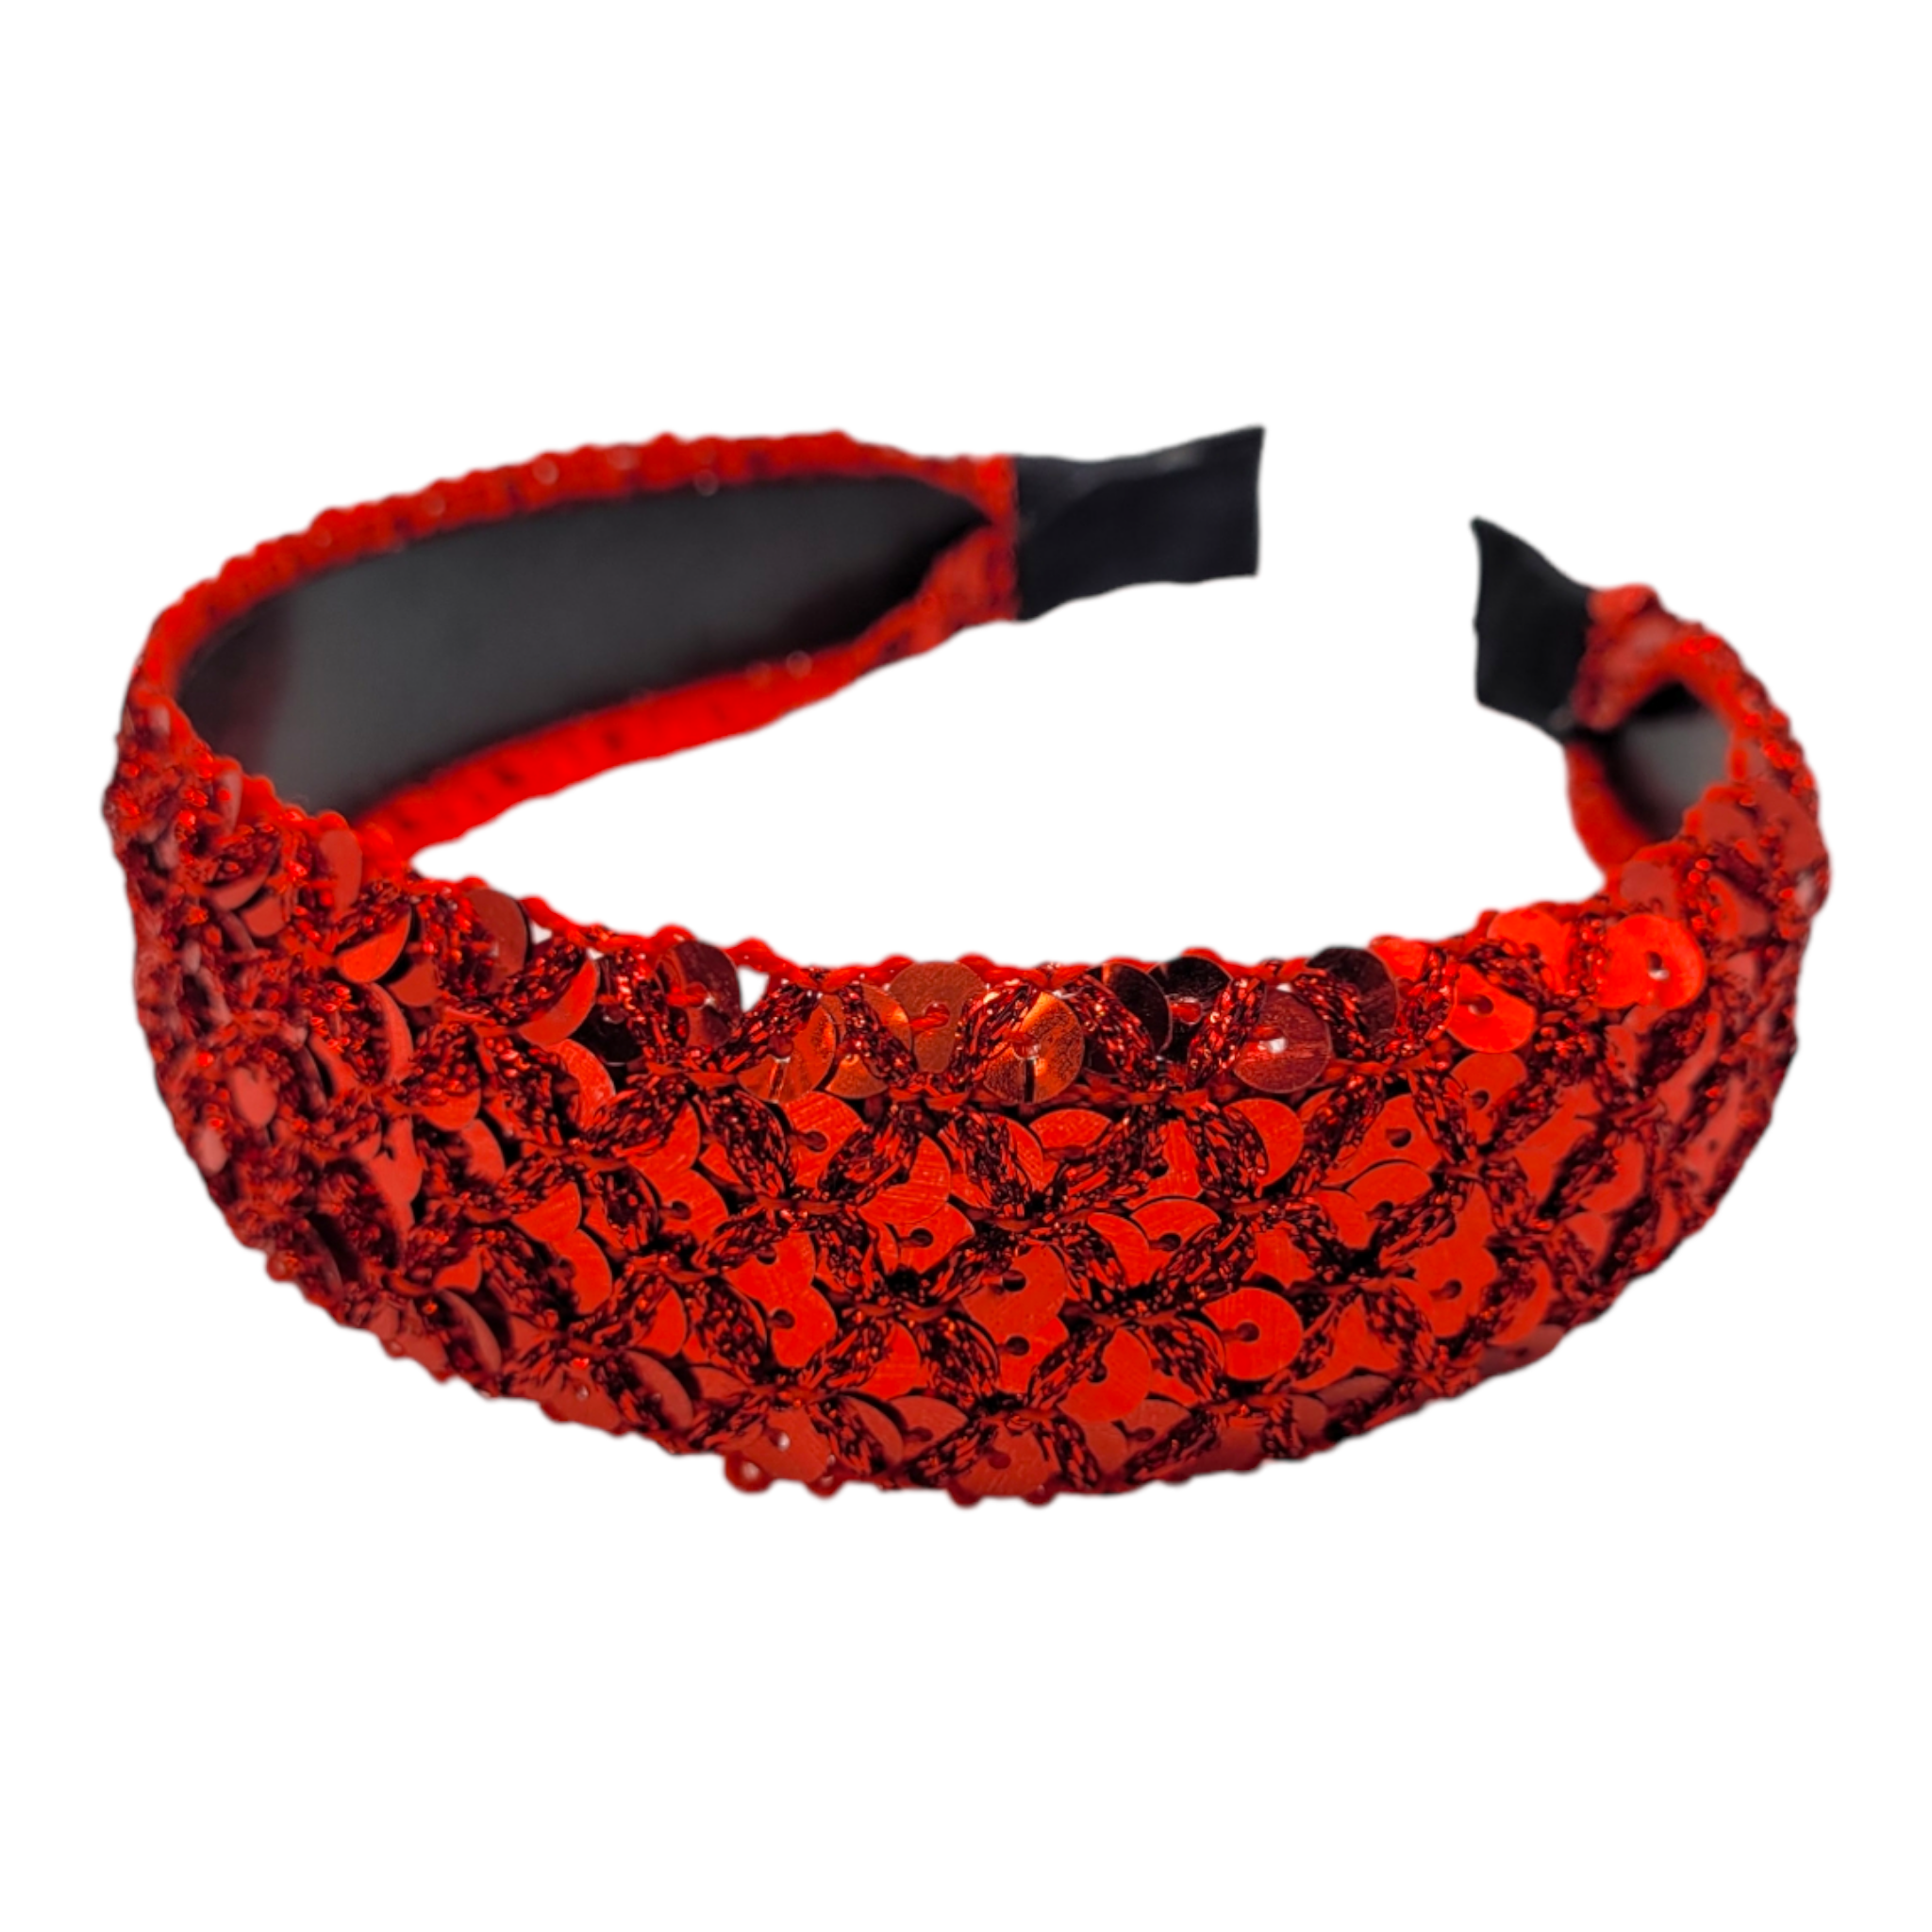 Red Sequin Headband-Accessories-LouisGeorge Boutique-LouisGeorge Boutique, Women’s Fashion Boutique Located in Trussville, Alabama